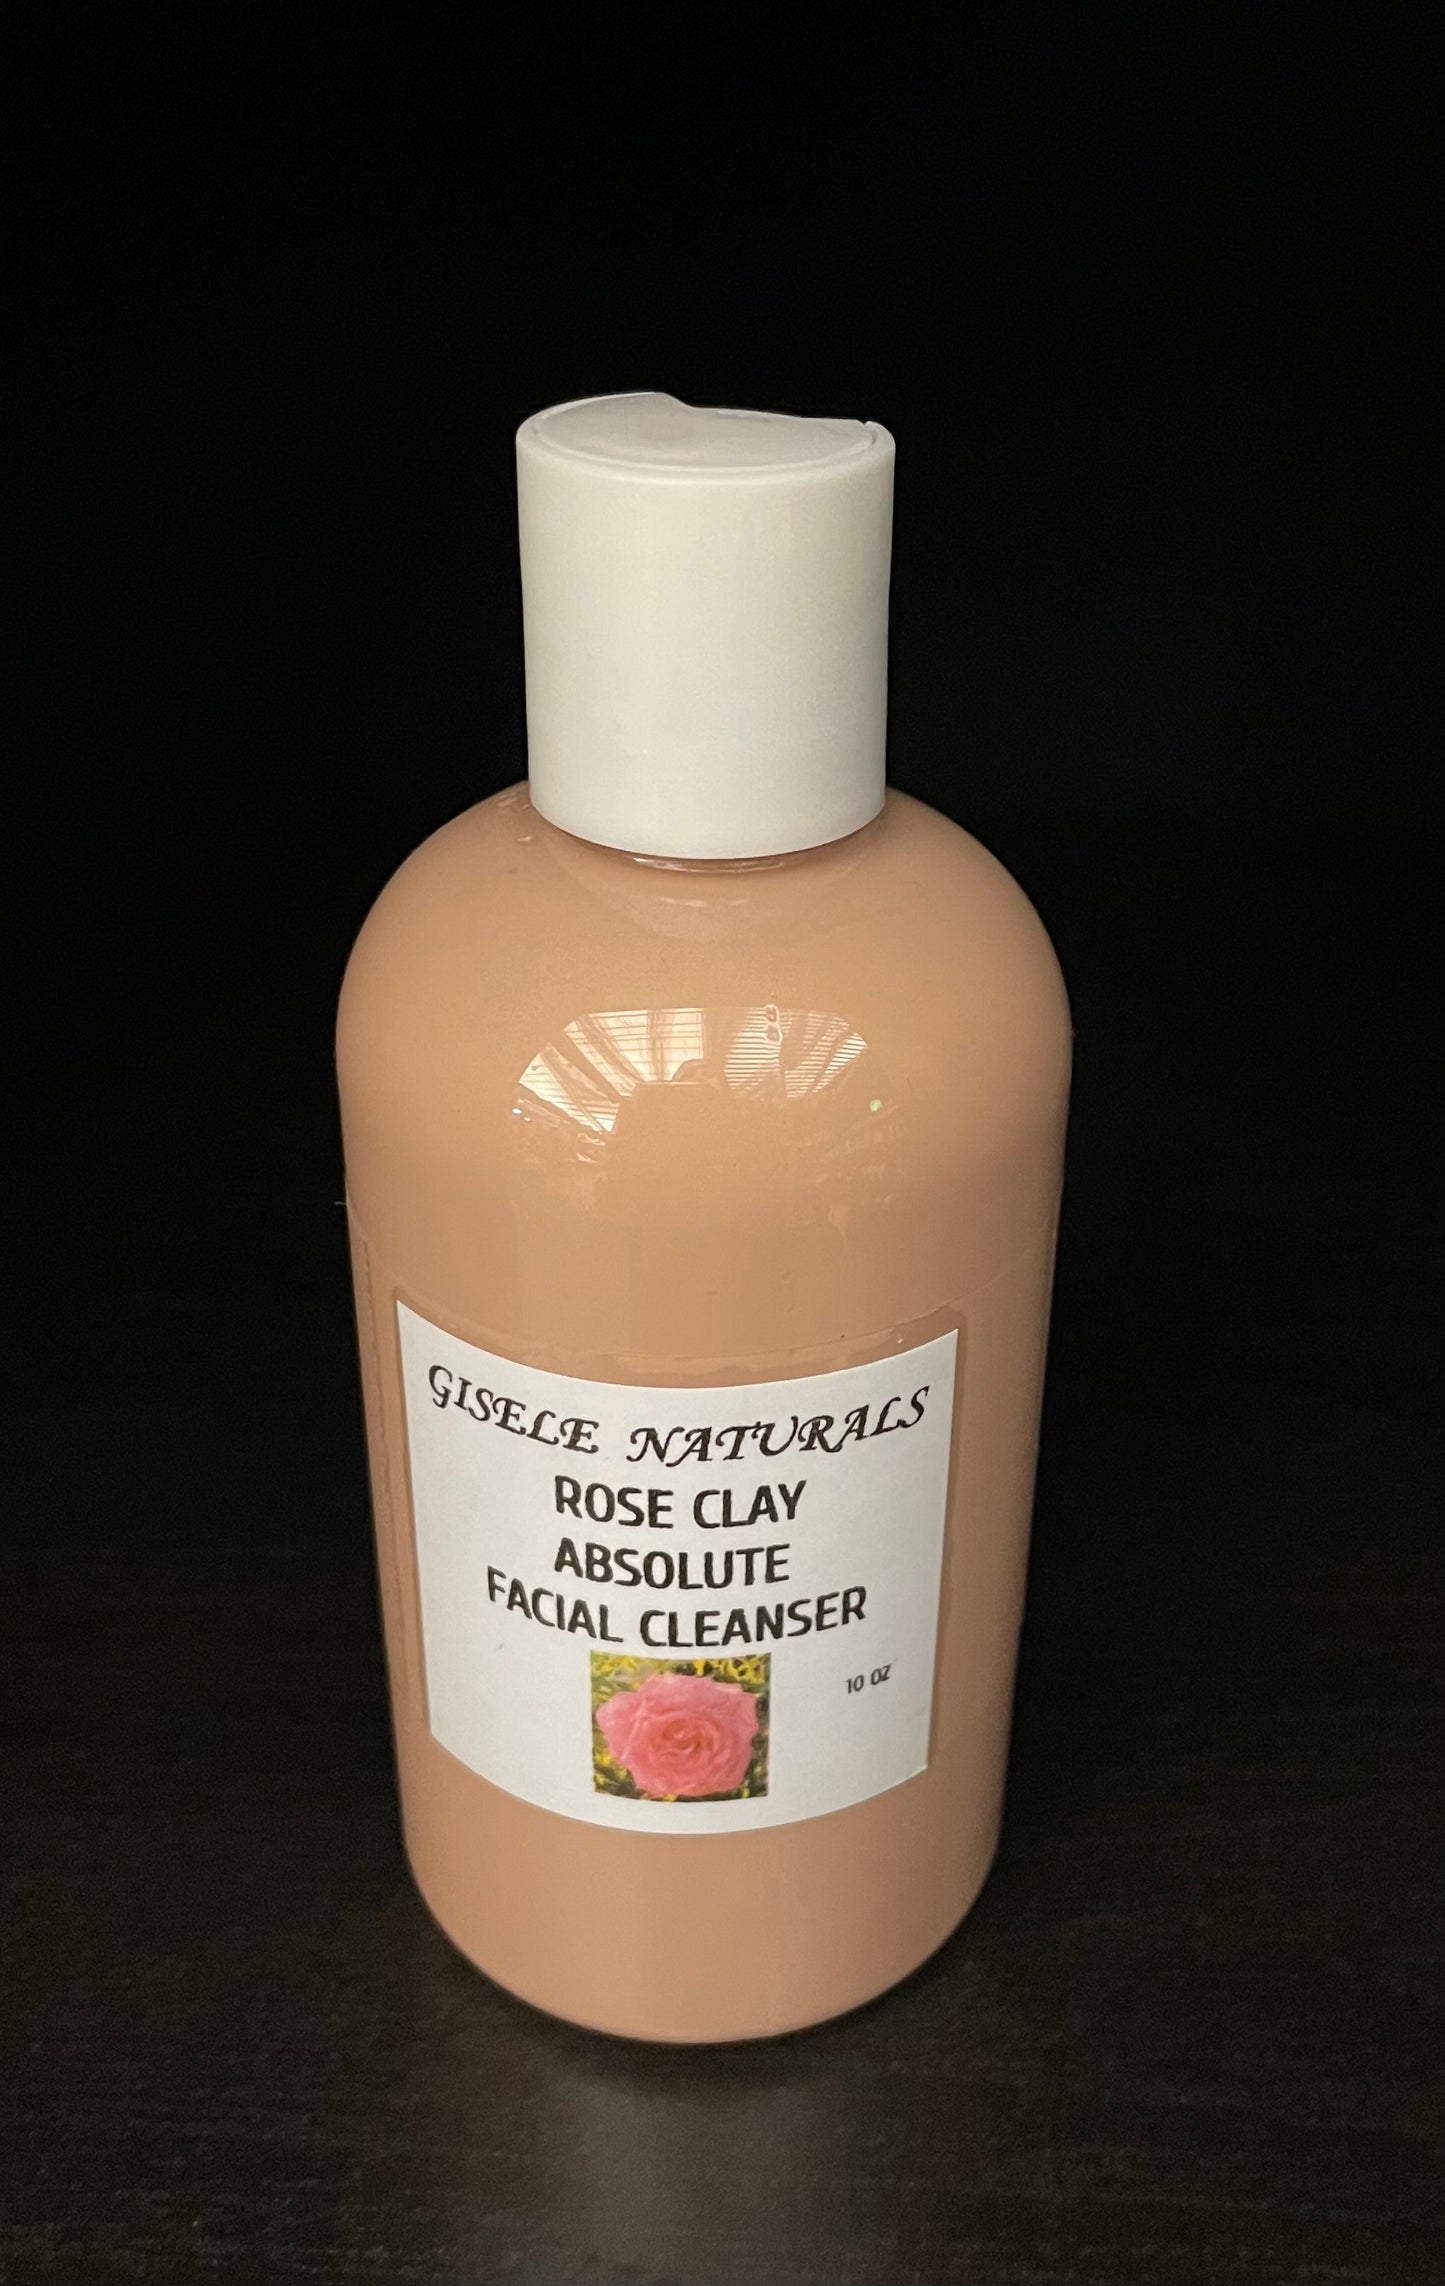 Rose clay absolute facial cleanser